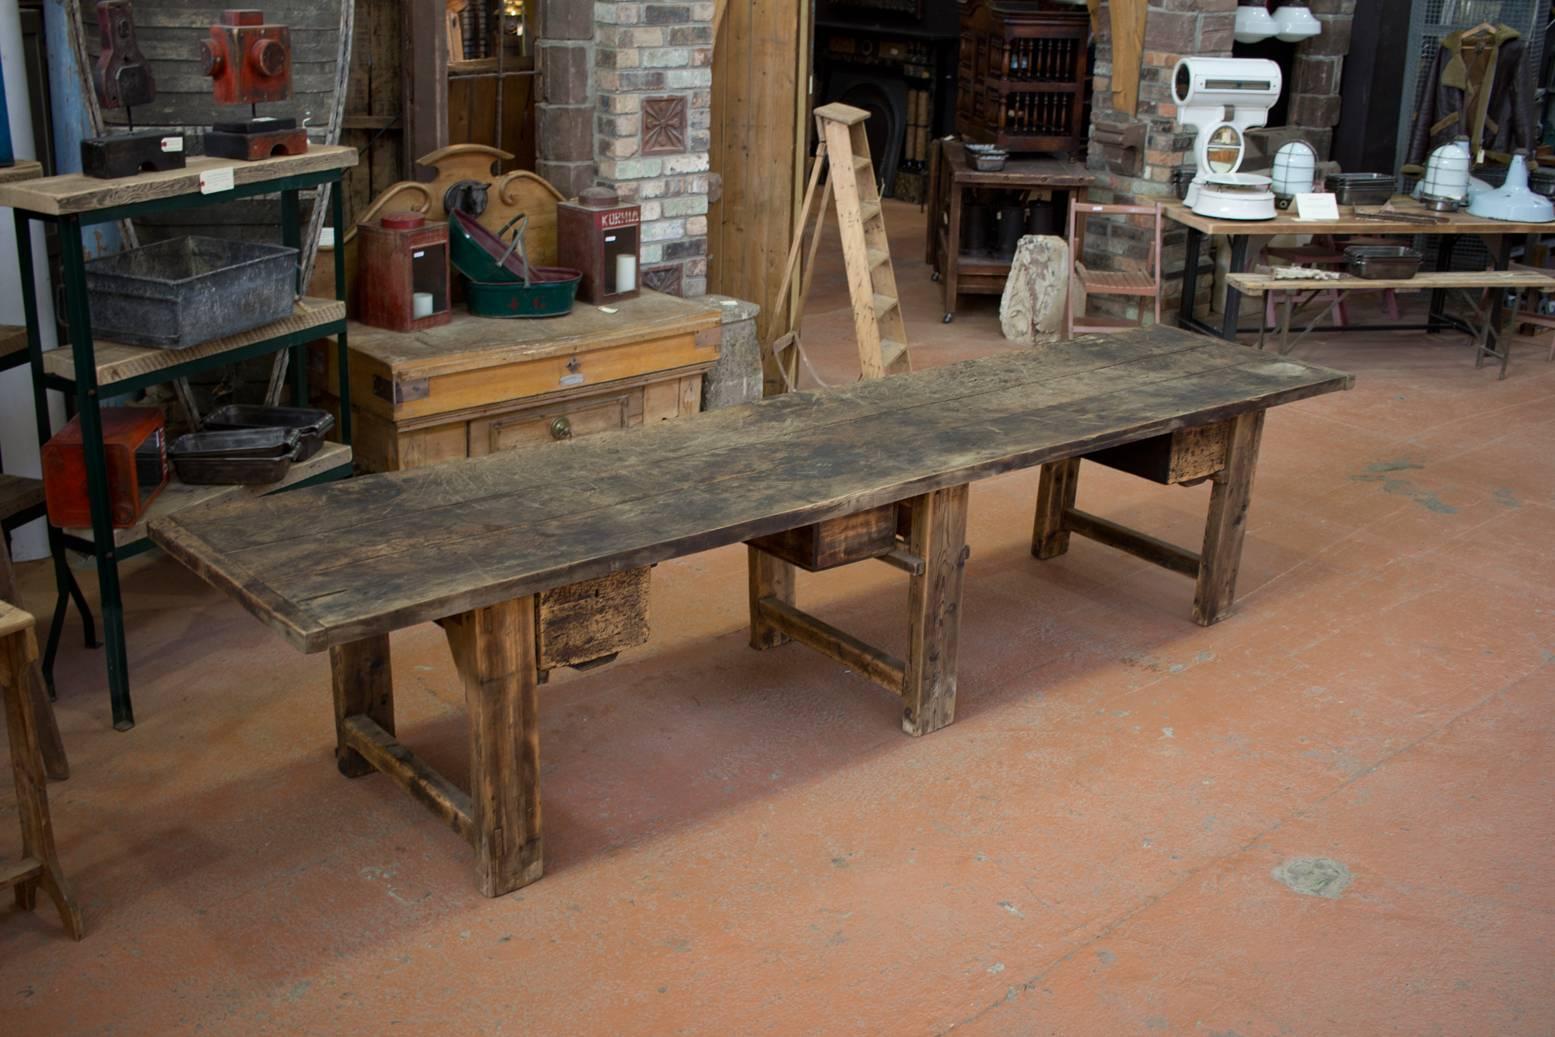 This is a very substantial and meaty antique Industrial work table with three deep drawers. Fantastic patina.